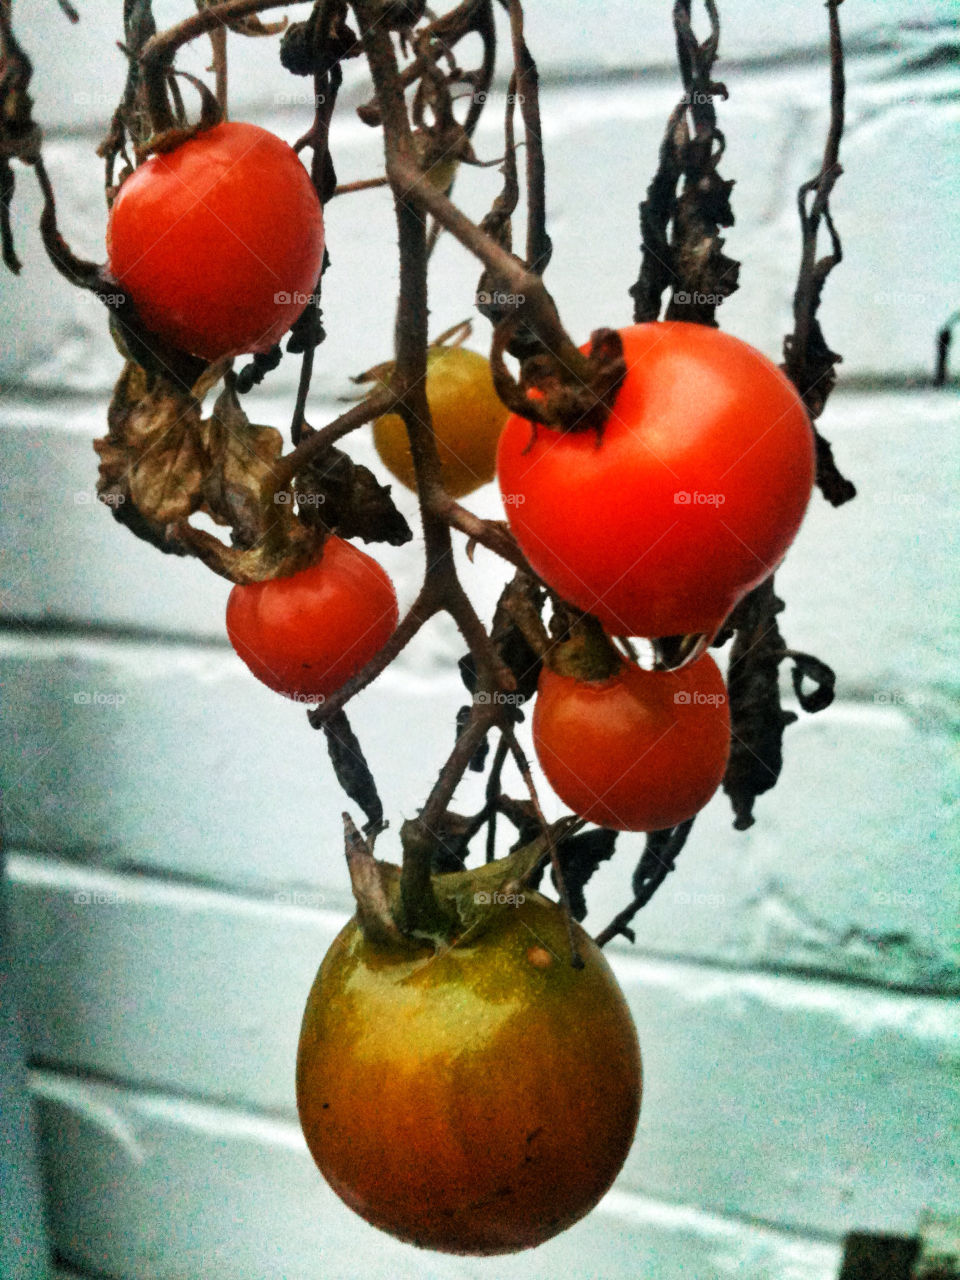 autumn tomatoes by lagerman